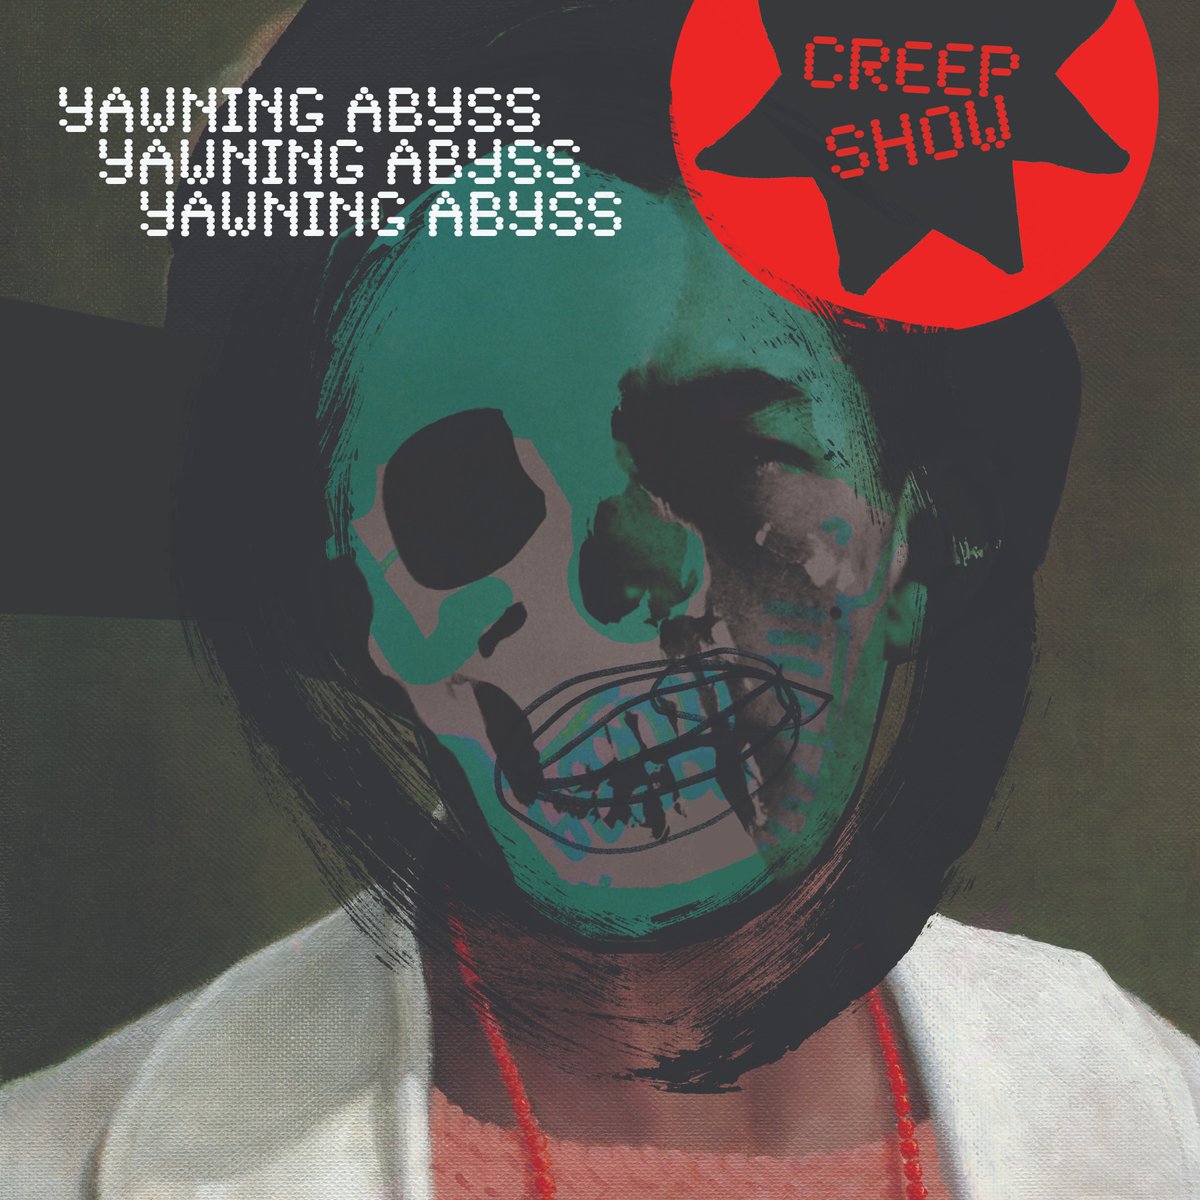 “Electronic dream team tackle Armageddon with wit... A furiously funky soundtrack to impending doom.” MOJO – 4 stars **** Thanks to @MOJOmagazine for their review of Creep Show's new album, Yawning Abyss